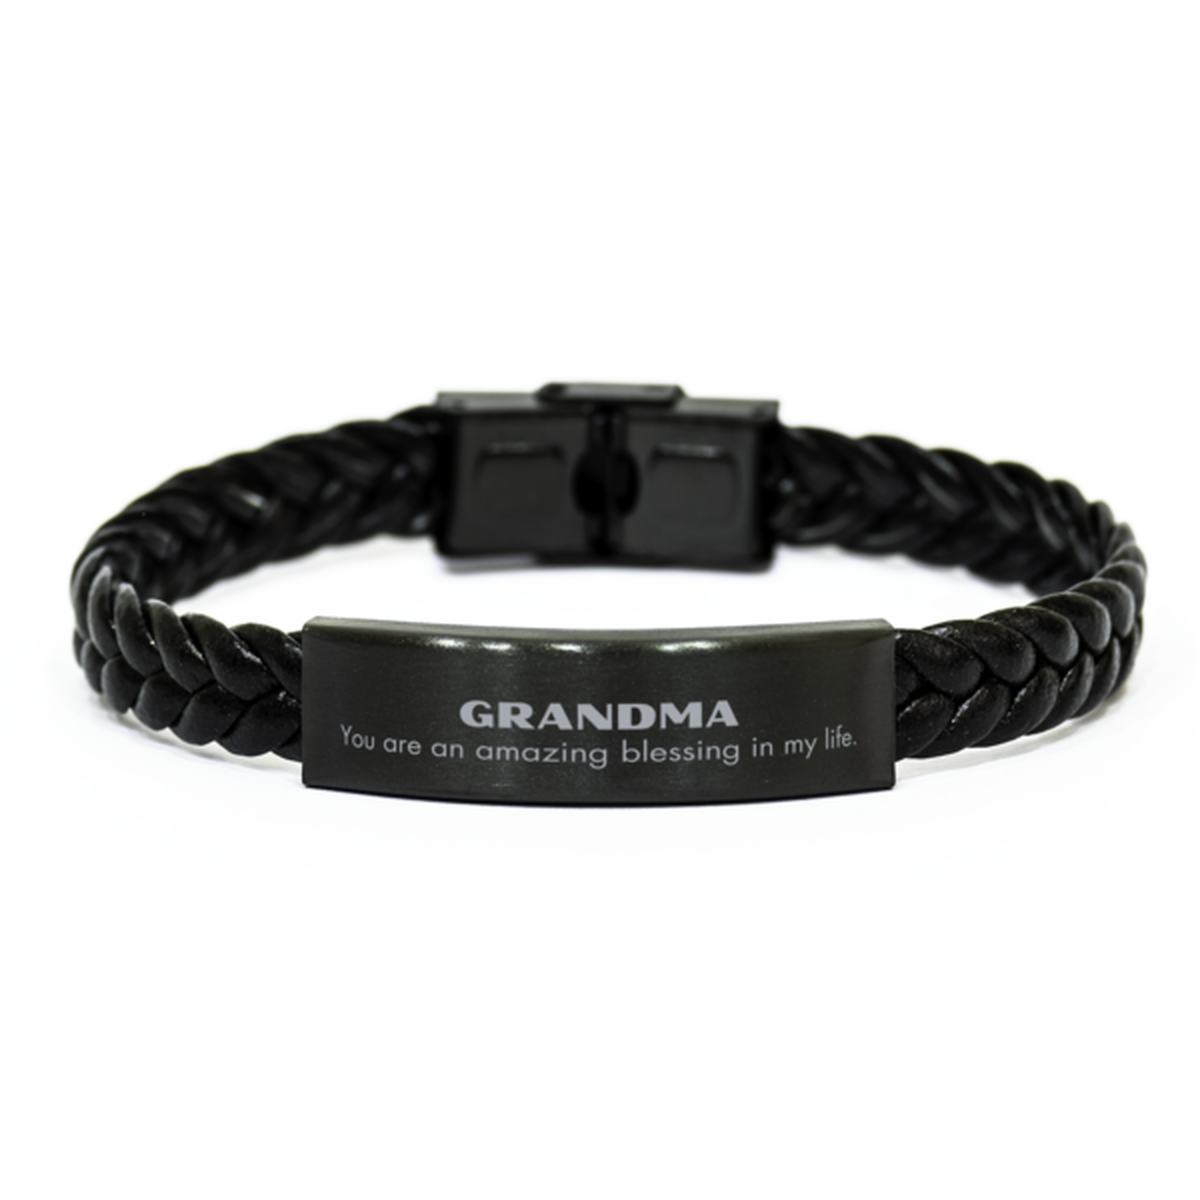 Grandma Braided Leather Bracelet, You are an amazing blessing in my life, Thank You Gifts For Grandma, Inspirational Birthday Christmas Unique Gifts For Grandma